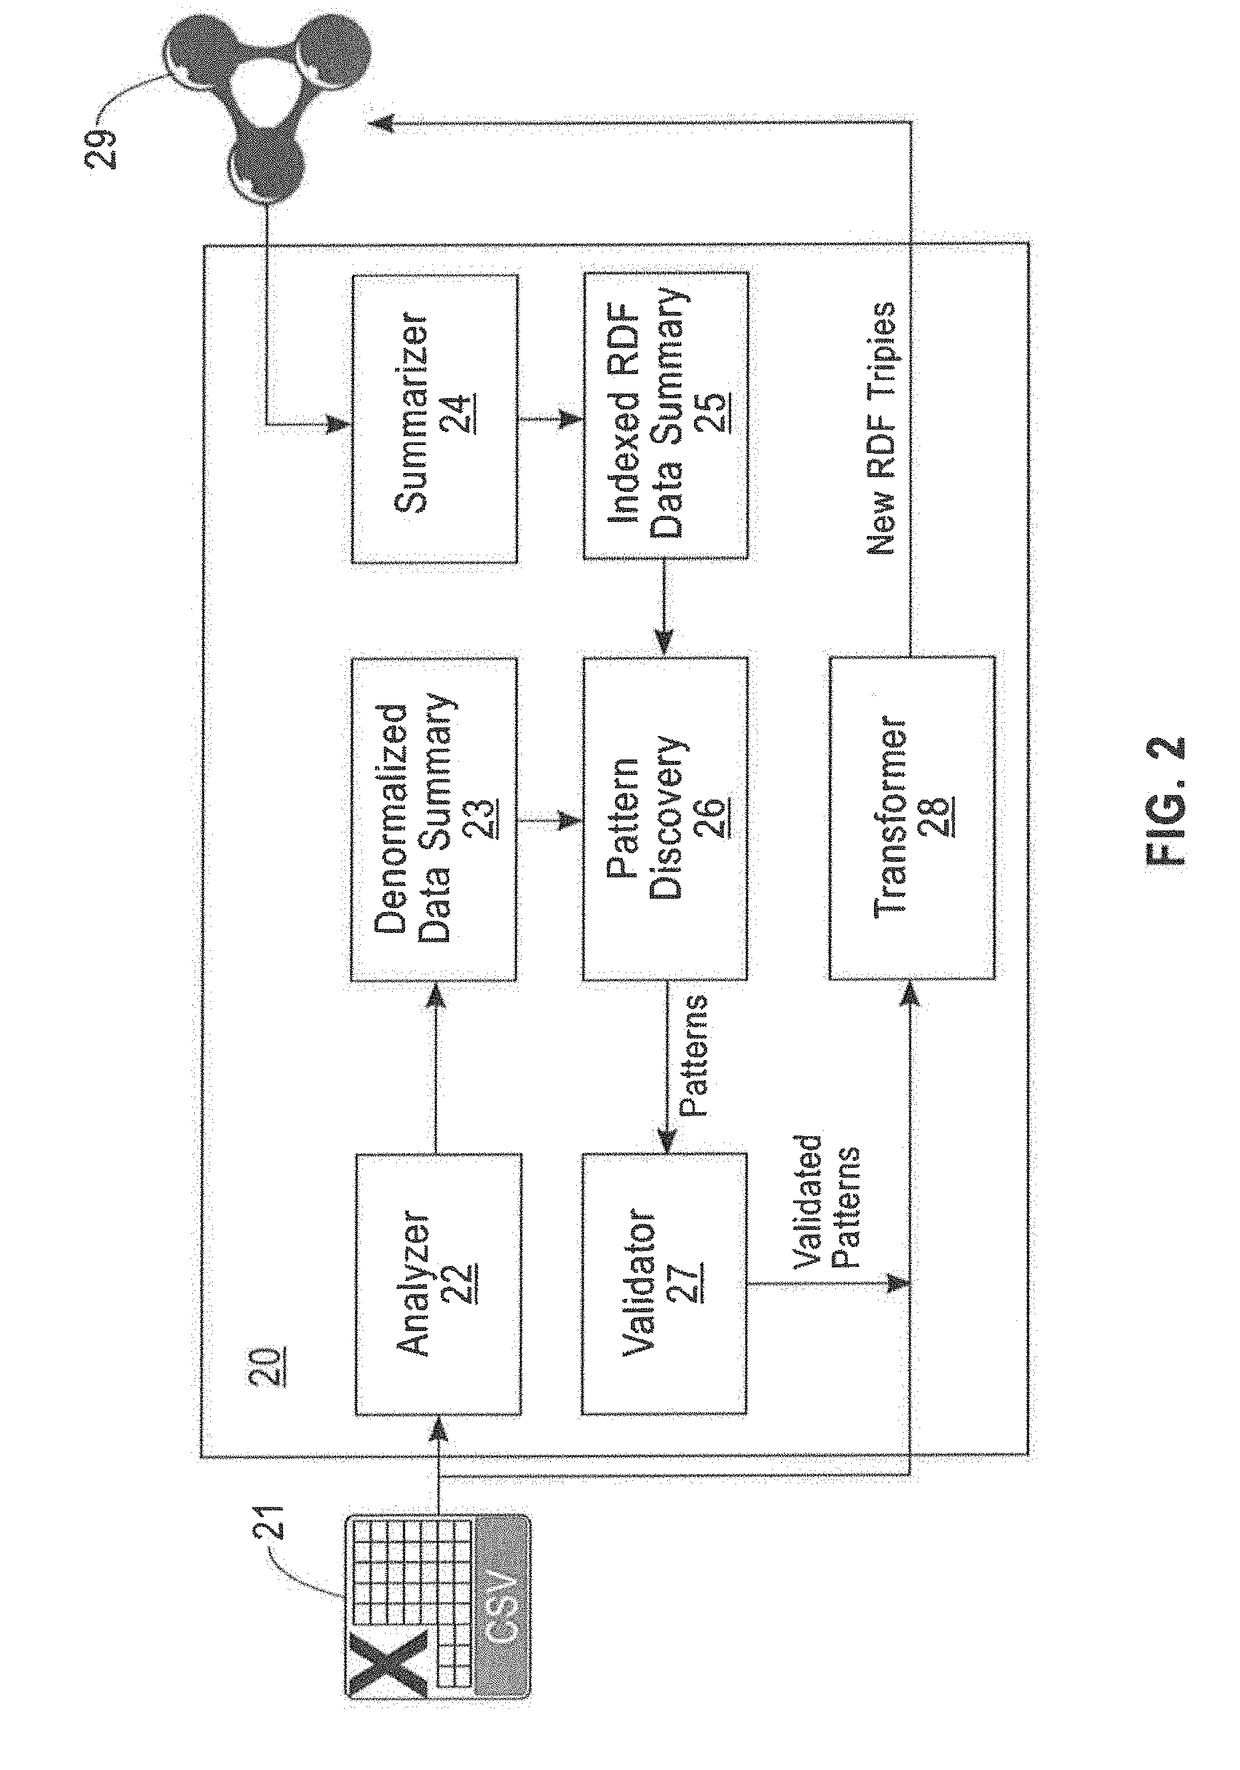 Unsupervised method for enriching rdf data sources from denormalized data